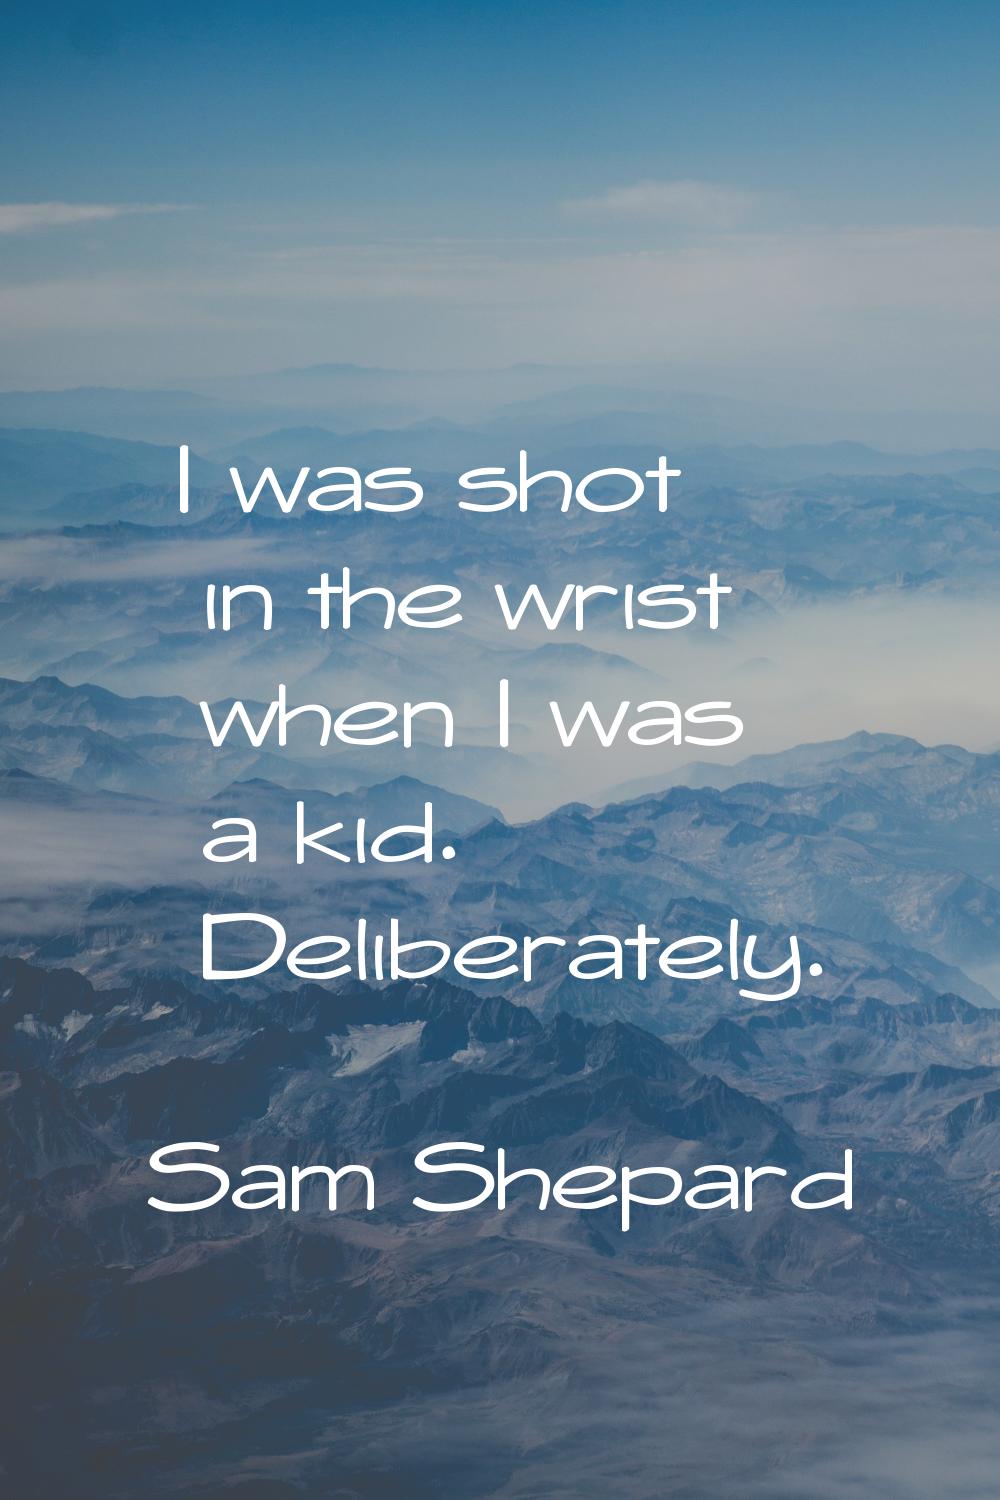 I was shot in the wrist when I was a kid. Deliberately.